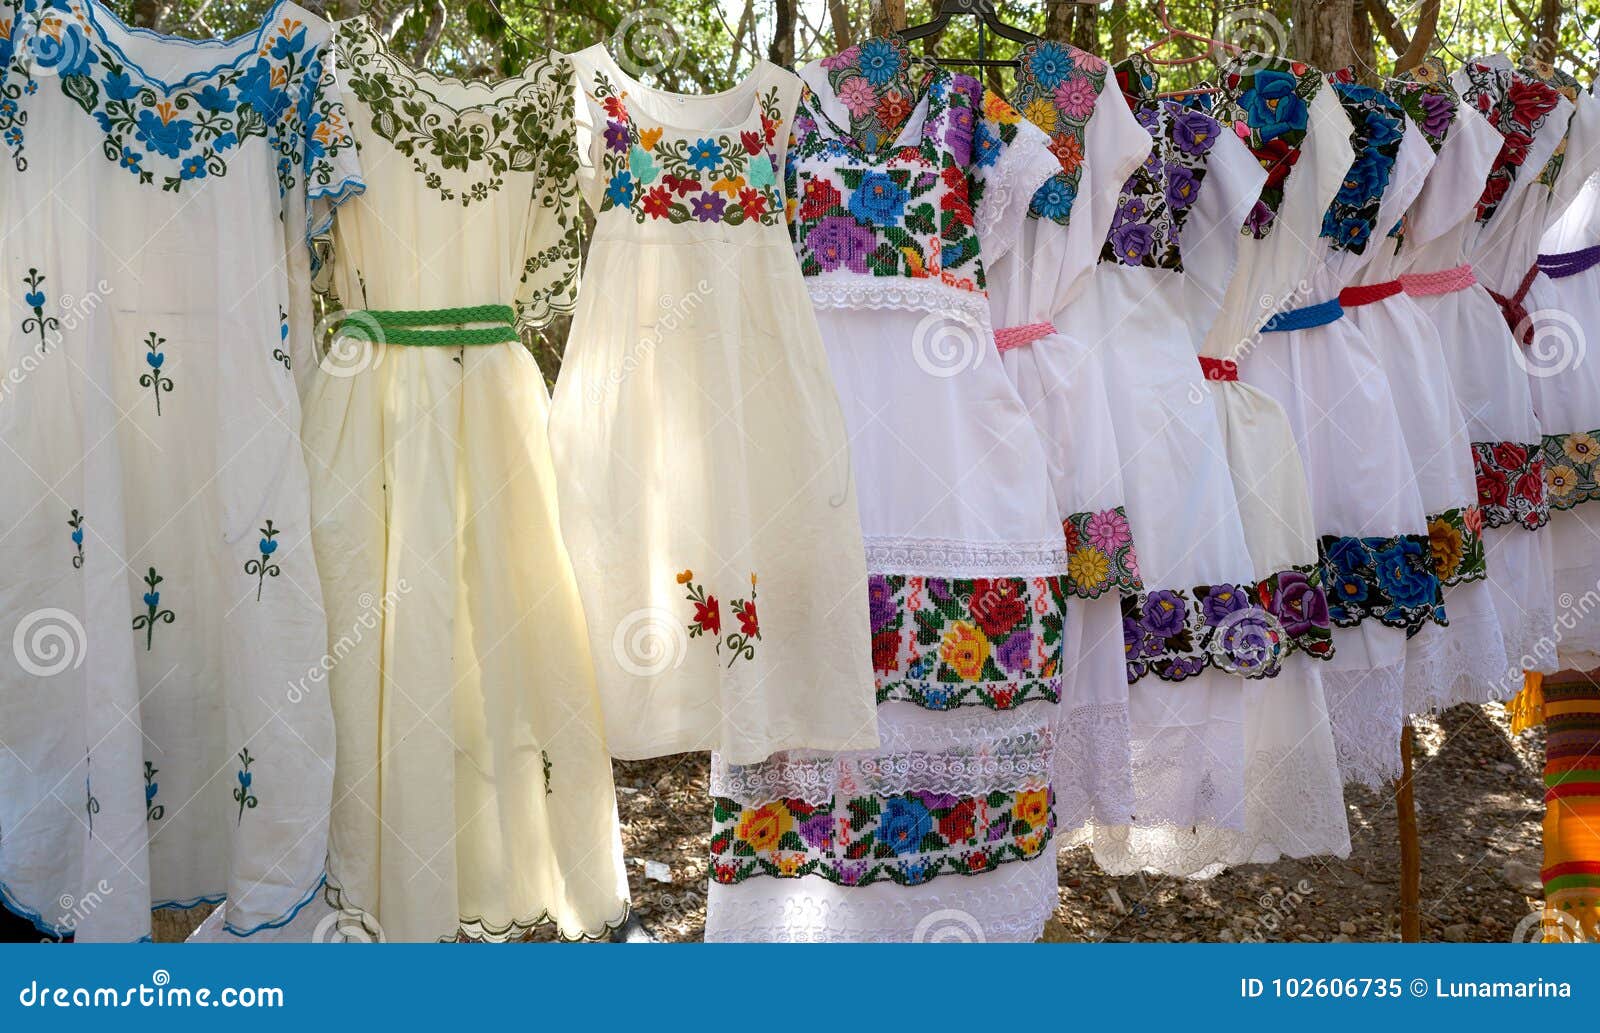 Chichen Itza Embroided Dresses Mexico Stock Image - Image of colorful ...